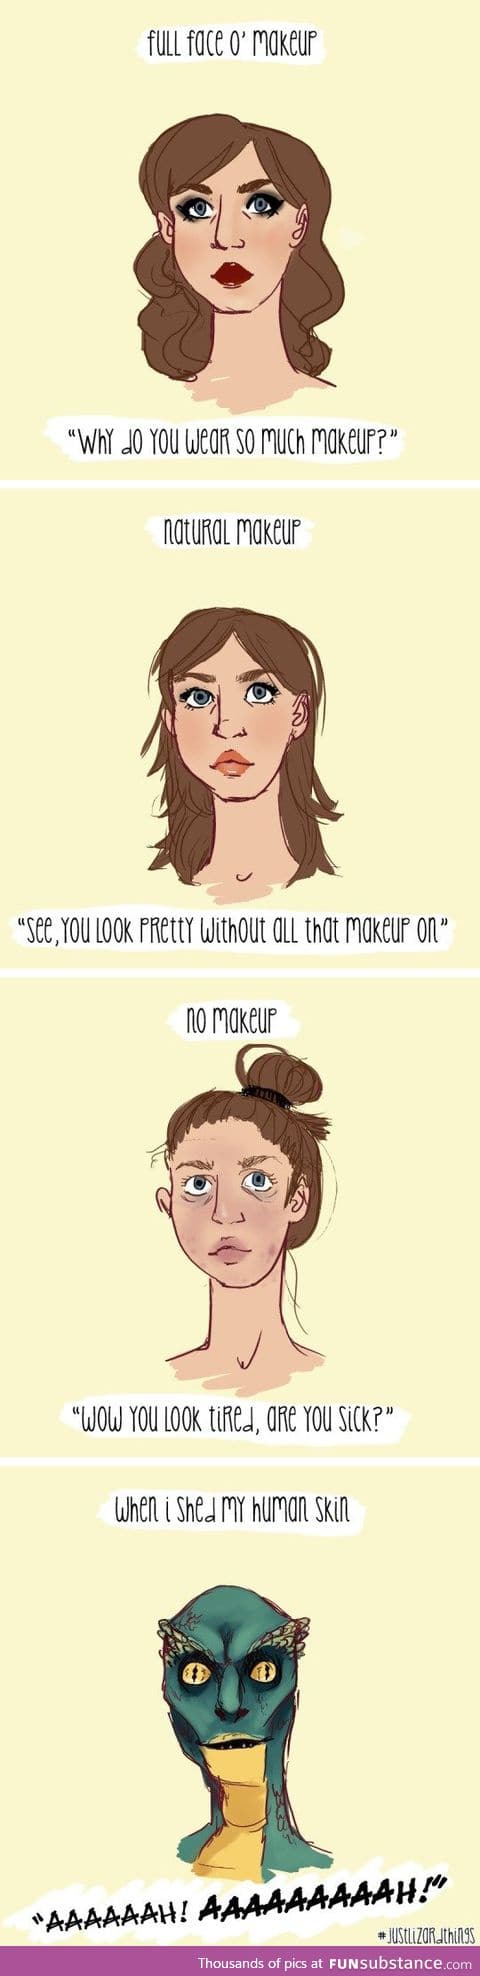 Why wear makeup